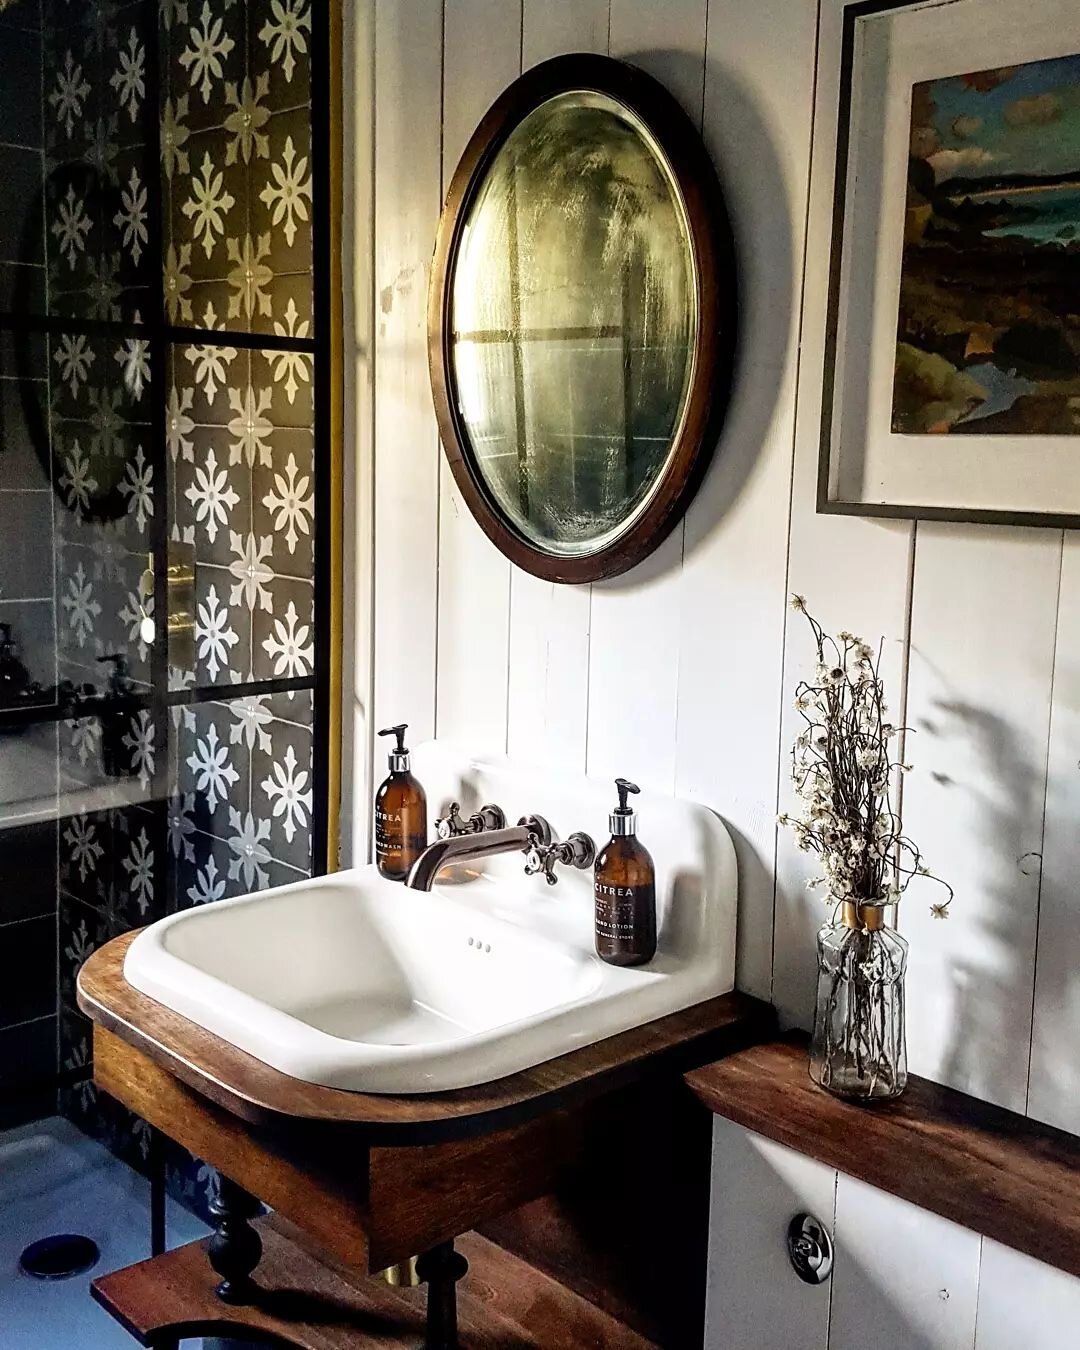 We have some beautiful bespoke pieces of furniture in our two waterside cabins, from repurposed kitchen islands to this gentleman's washstand made from recycled hardwood and an old school washbasin with a generous upstand. We hope that Mr Batman, tha